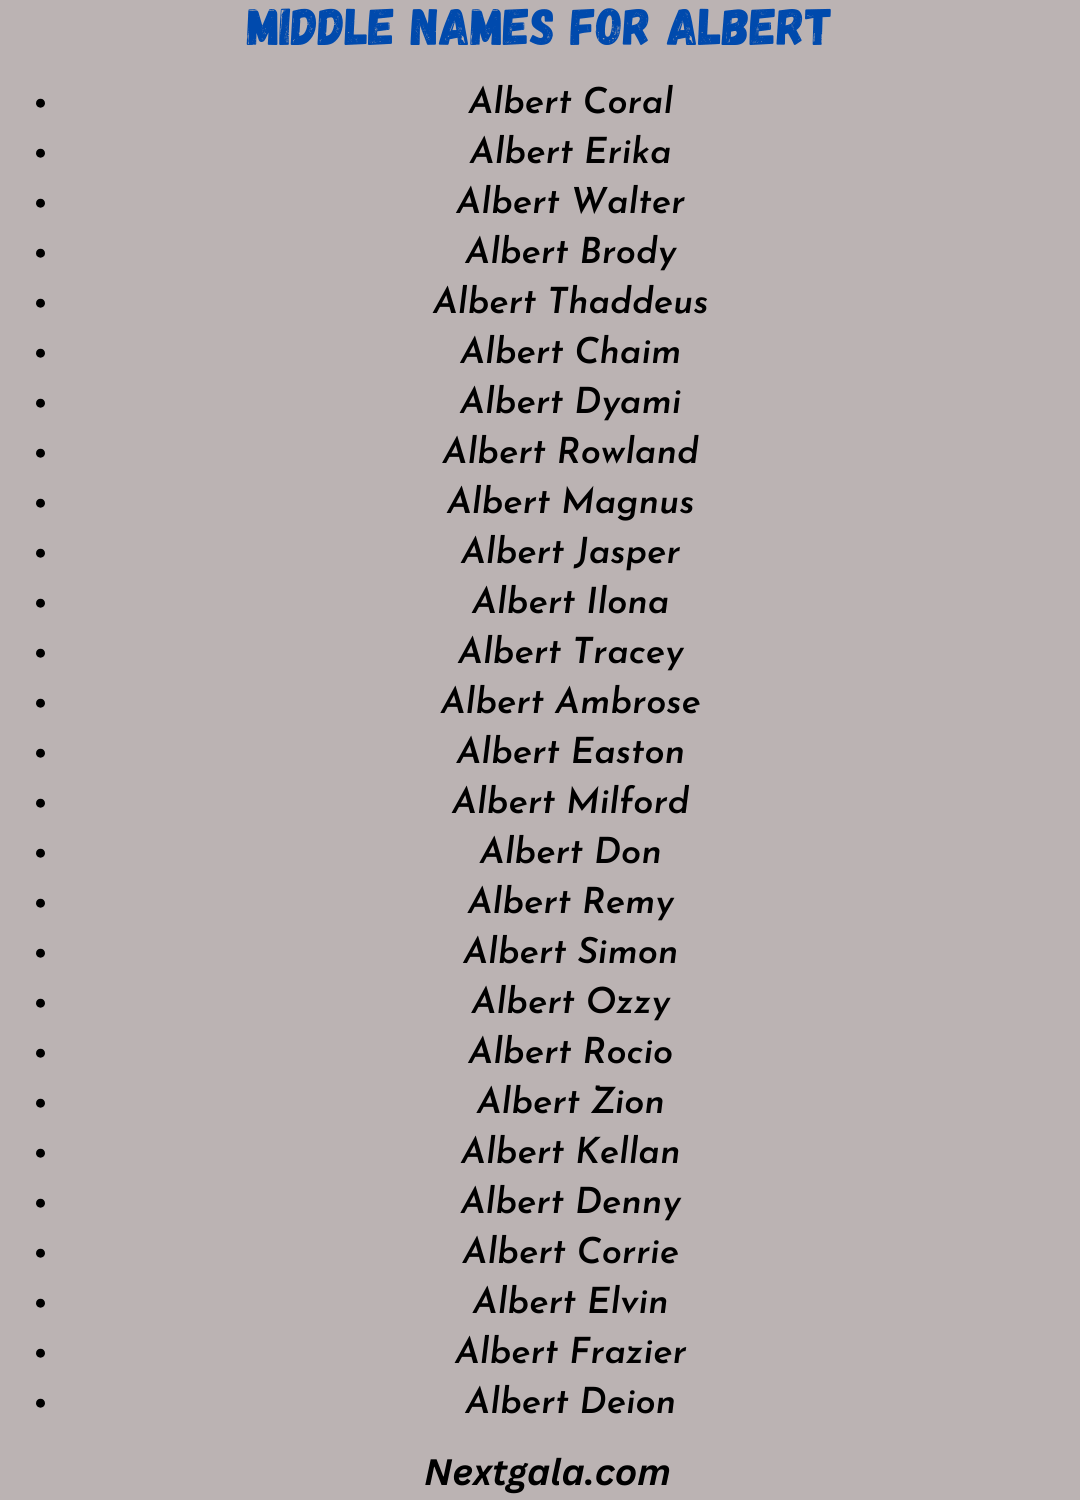 Middle Names for Albert